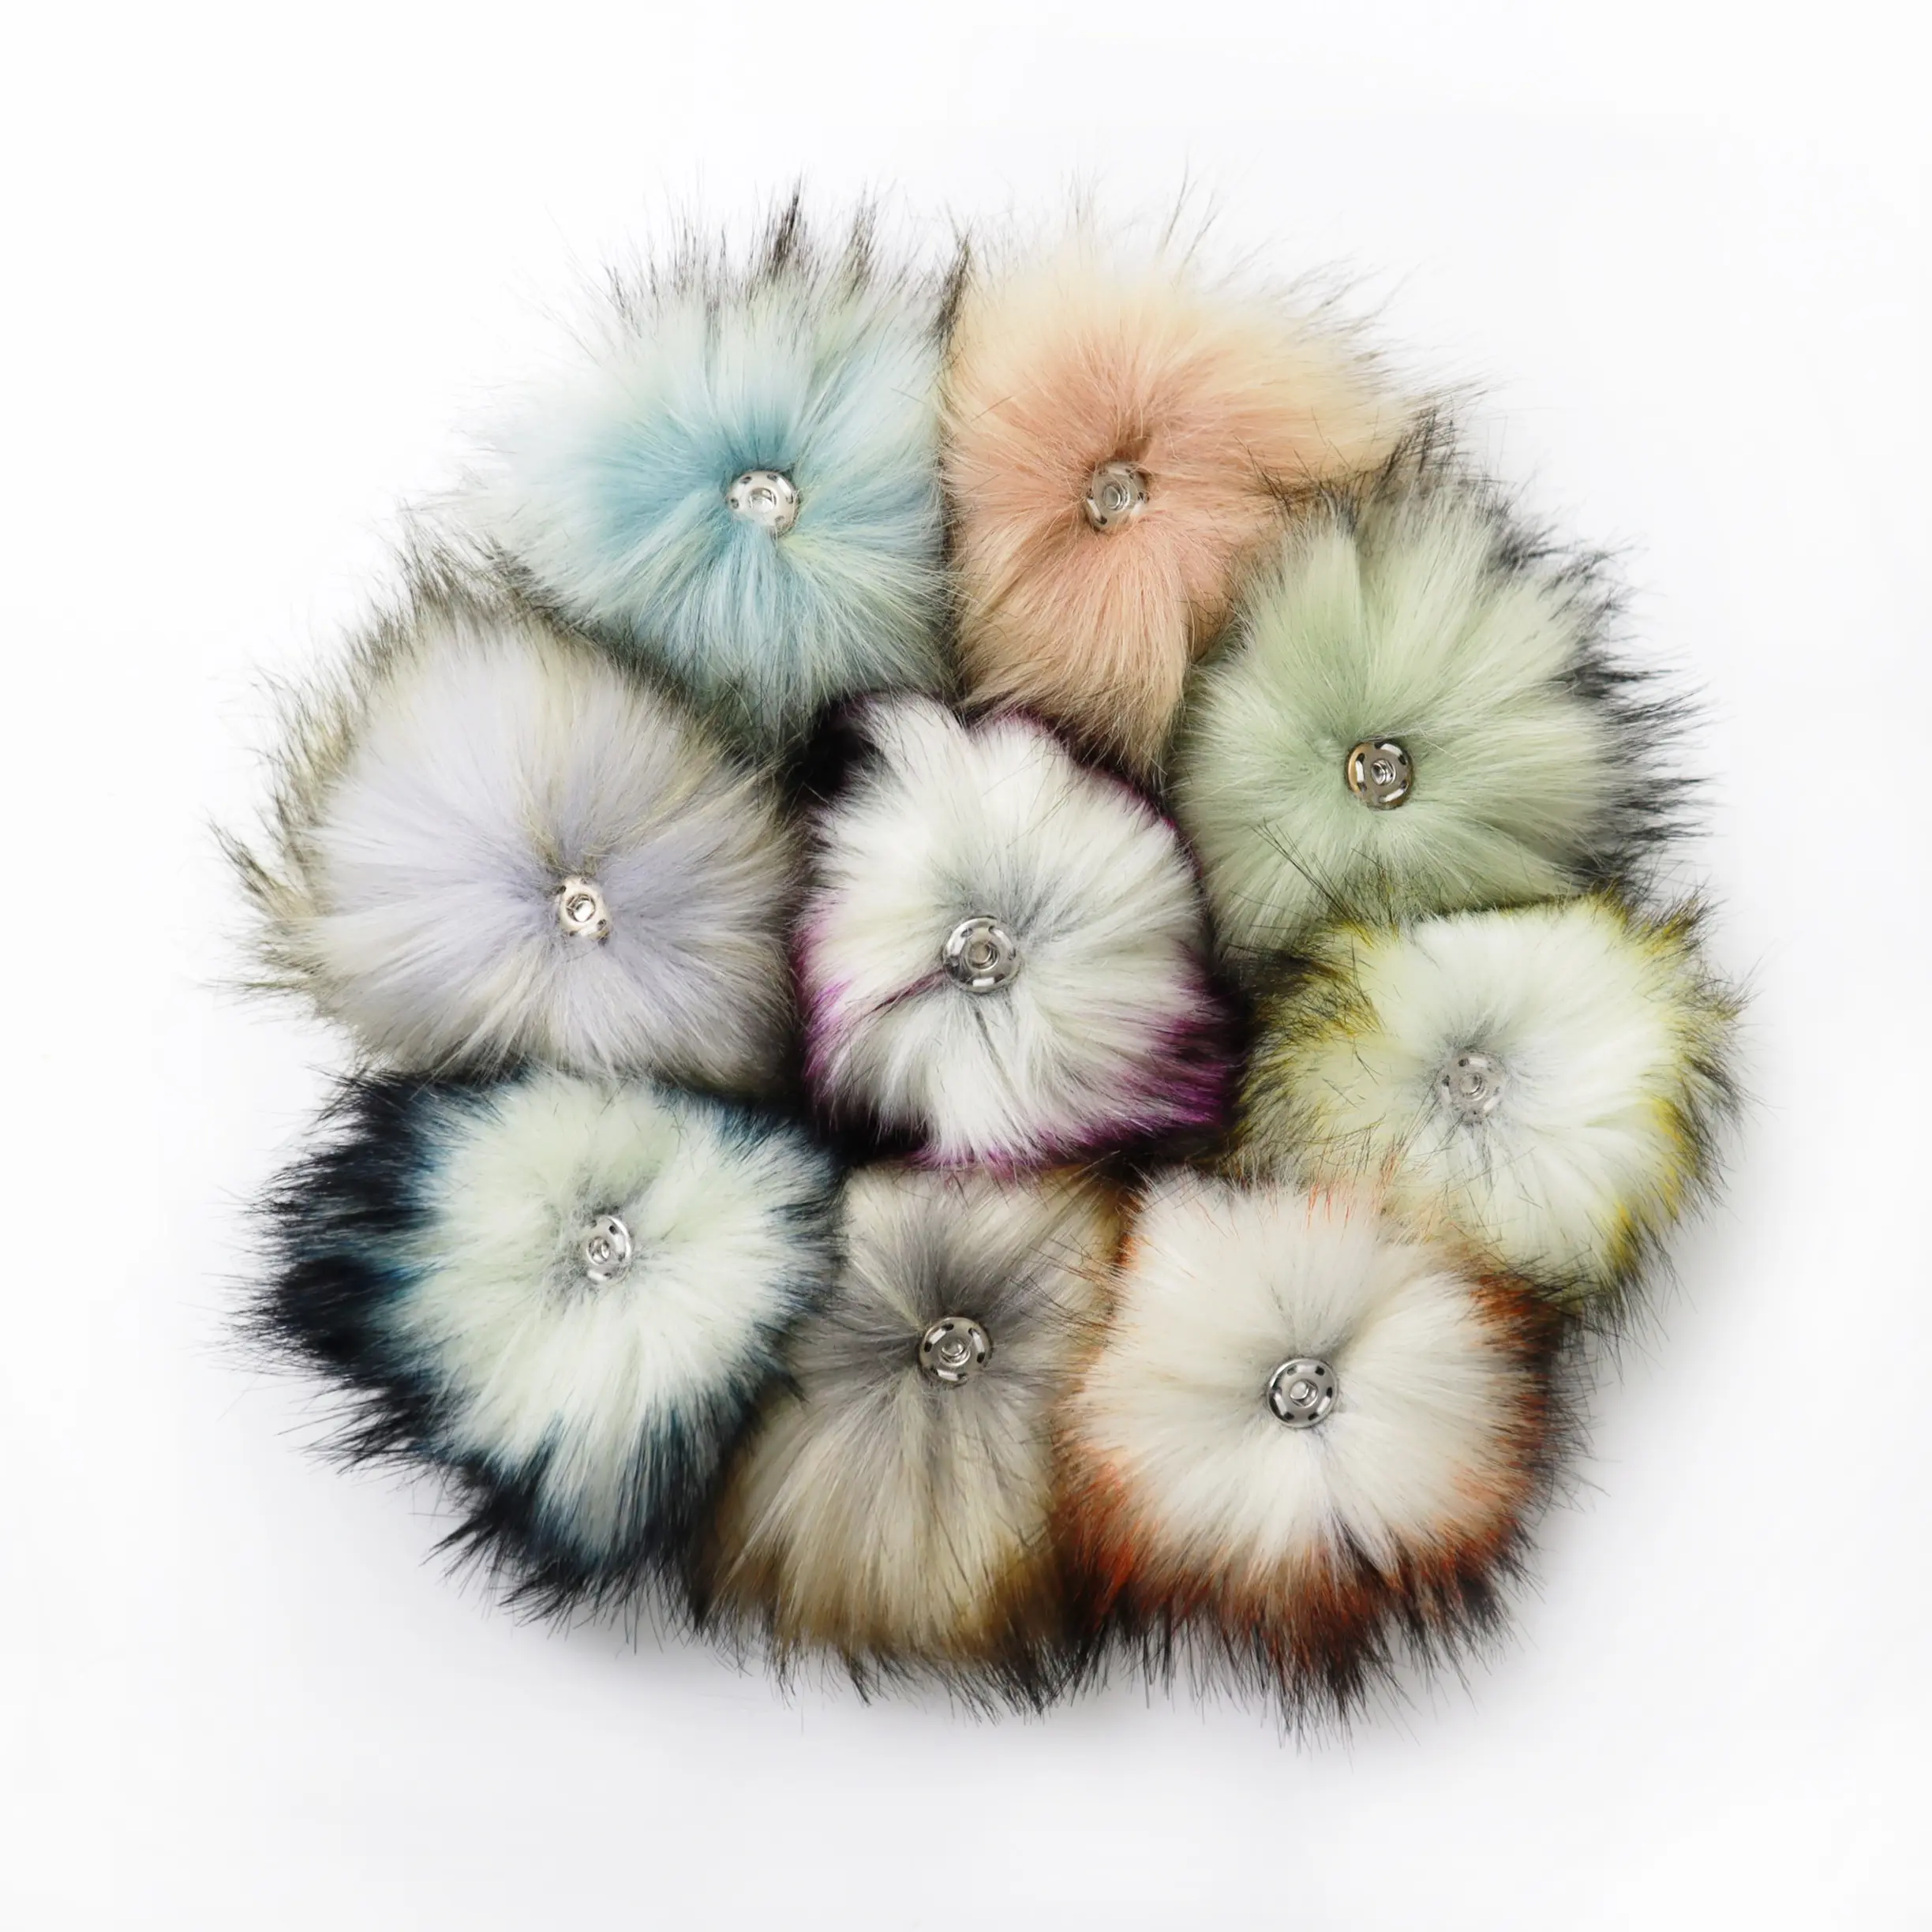 Faux Fur Pom Pom with Snap Buttons for Knitting Beanie Hats Fluffy Detachable Furry Balls Keychain Keyring Accessories